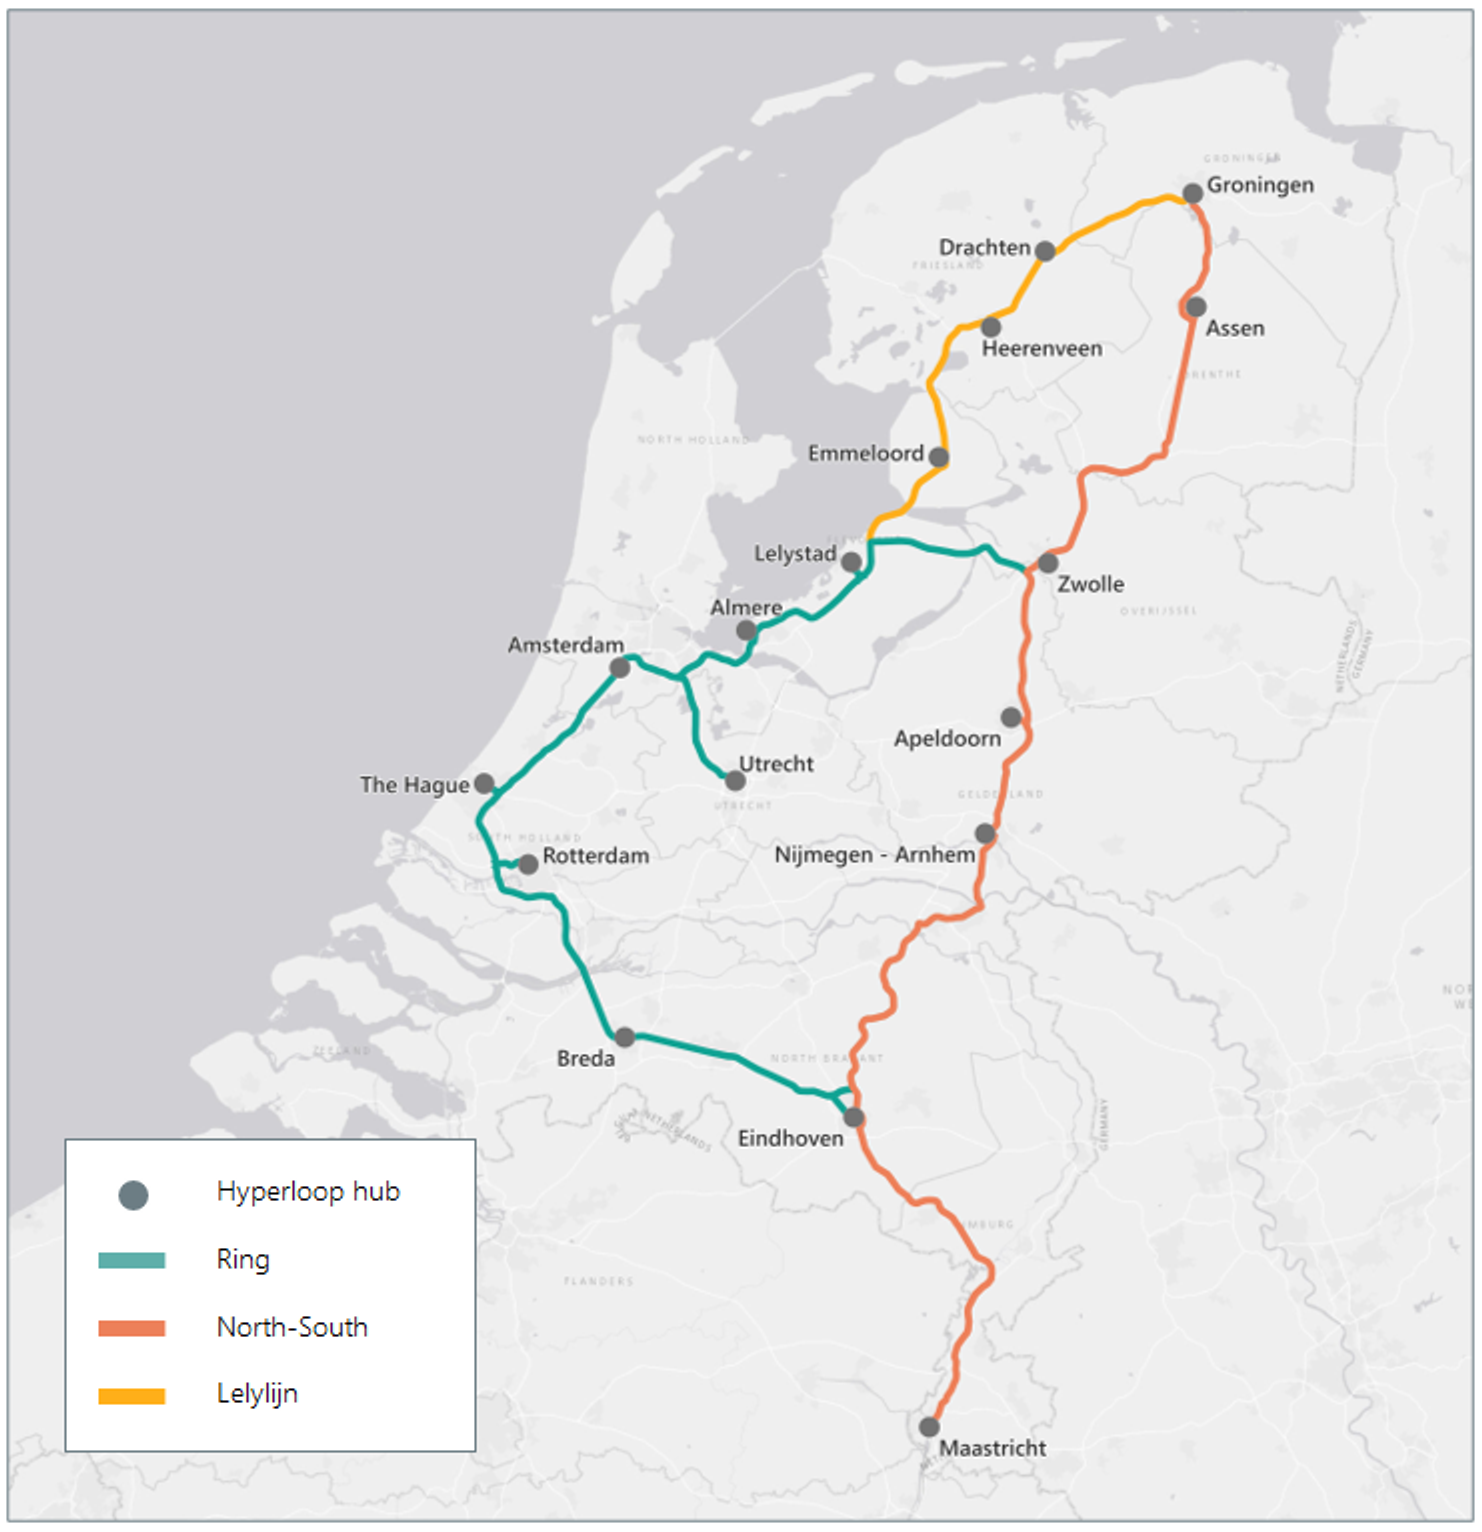 Map of the proposed hyperloop routes for the Netherlands.